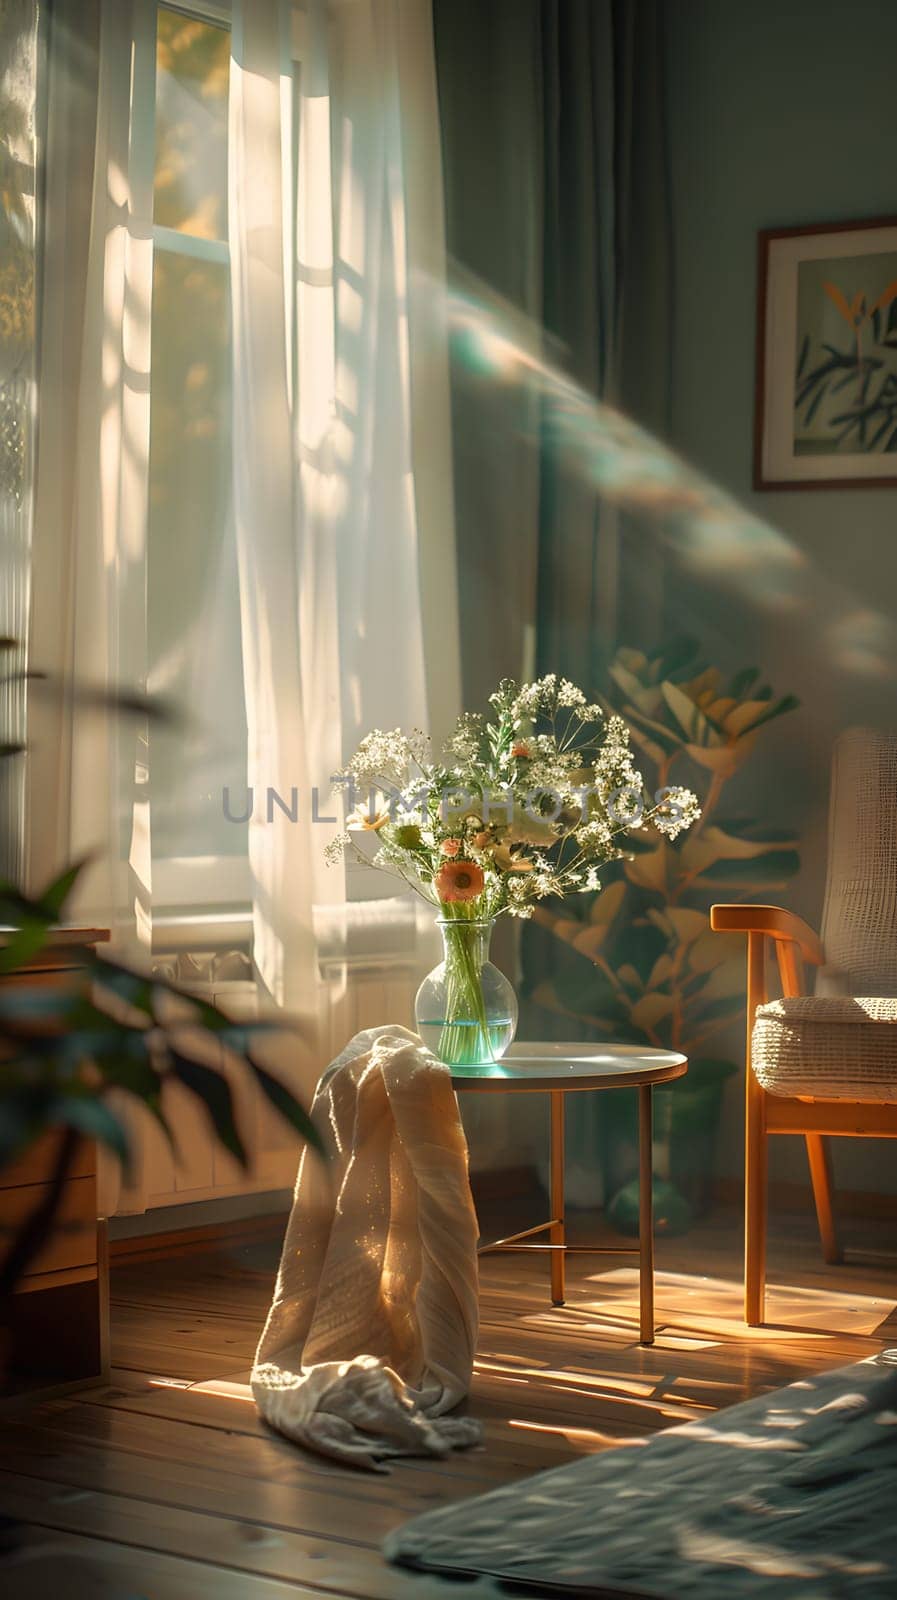 Natural sunlight filters through the curtains, illuminating a bouquet of flowers in a vase on a wooden table in a cozy living room interior